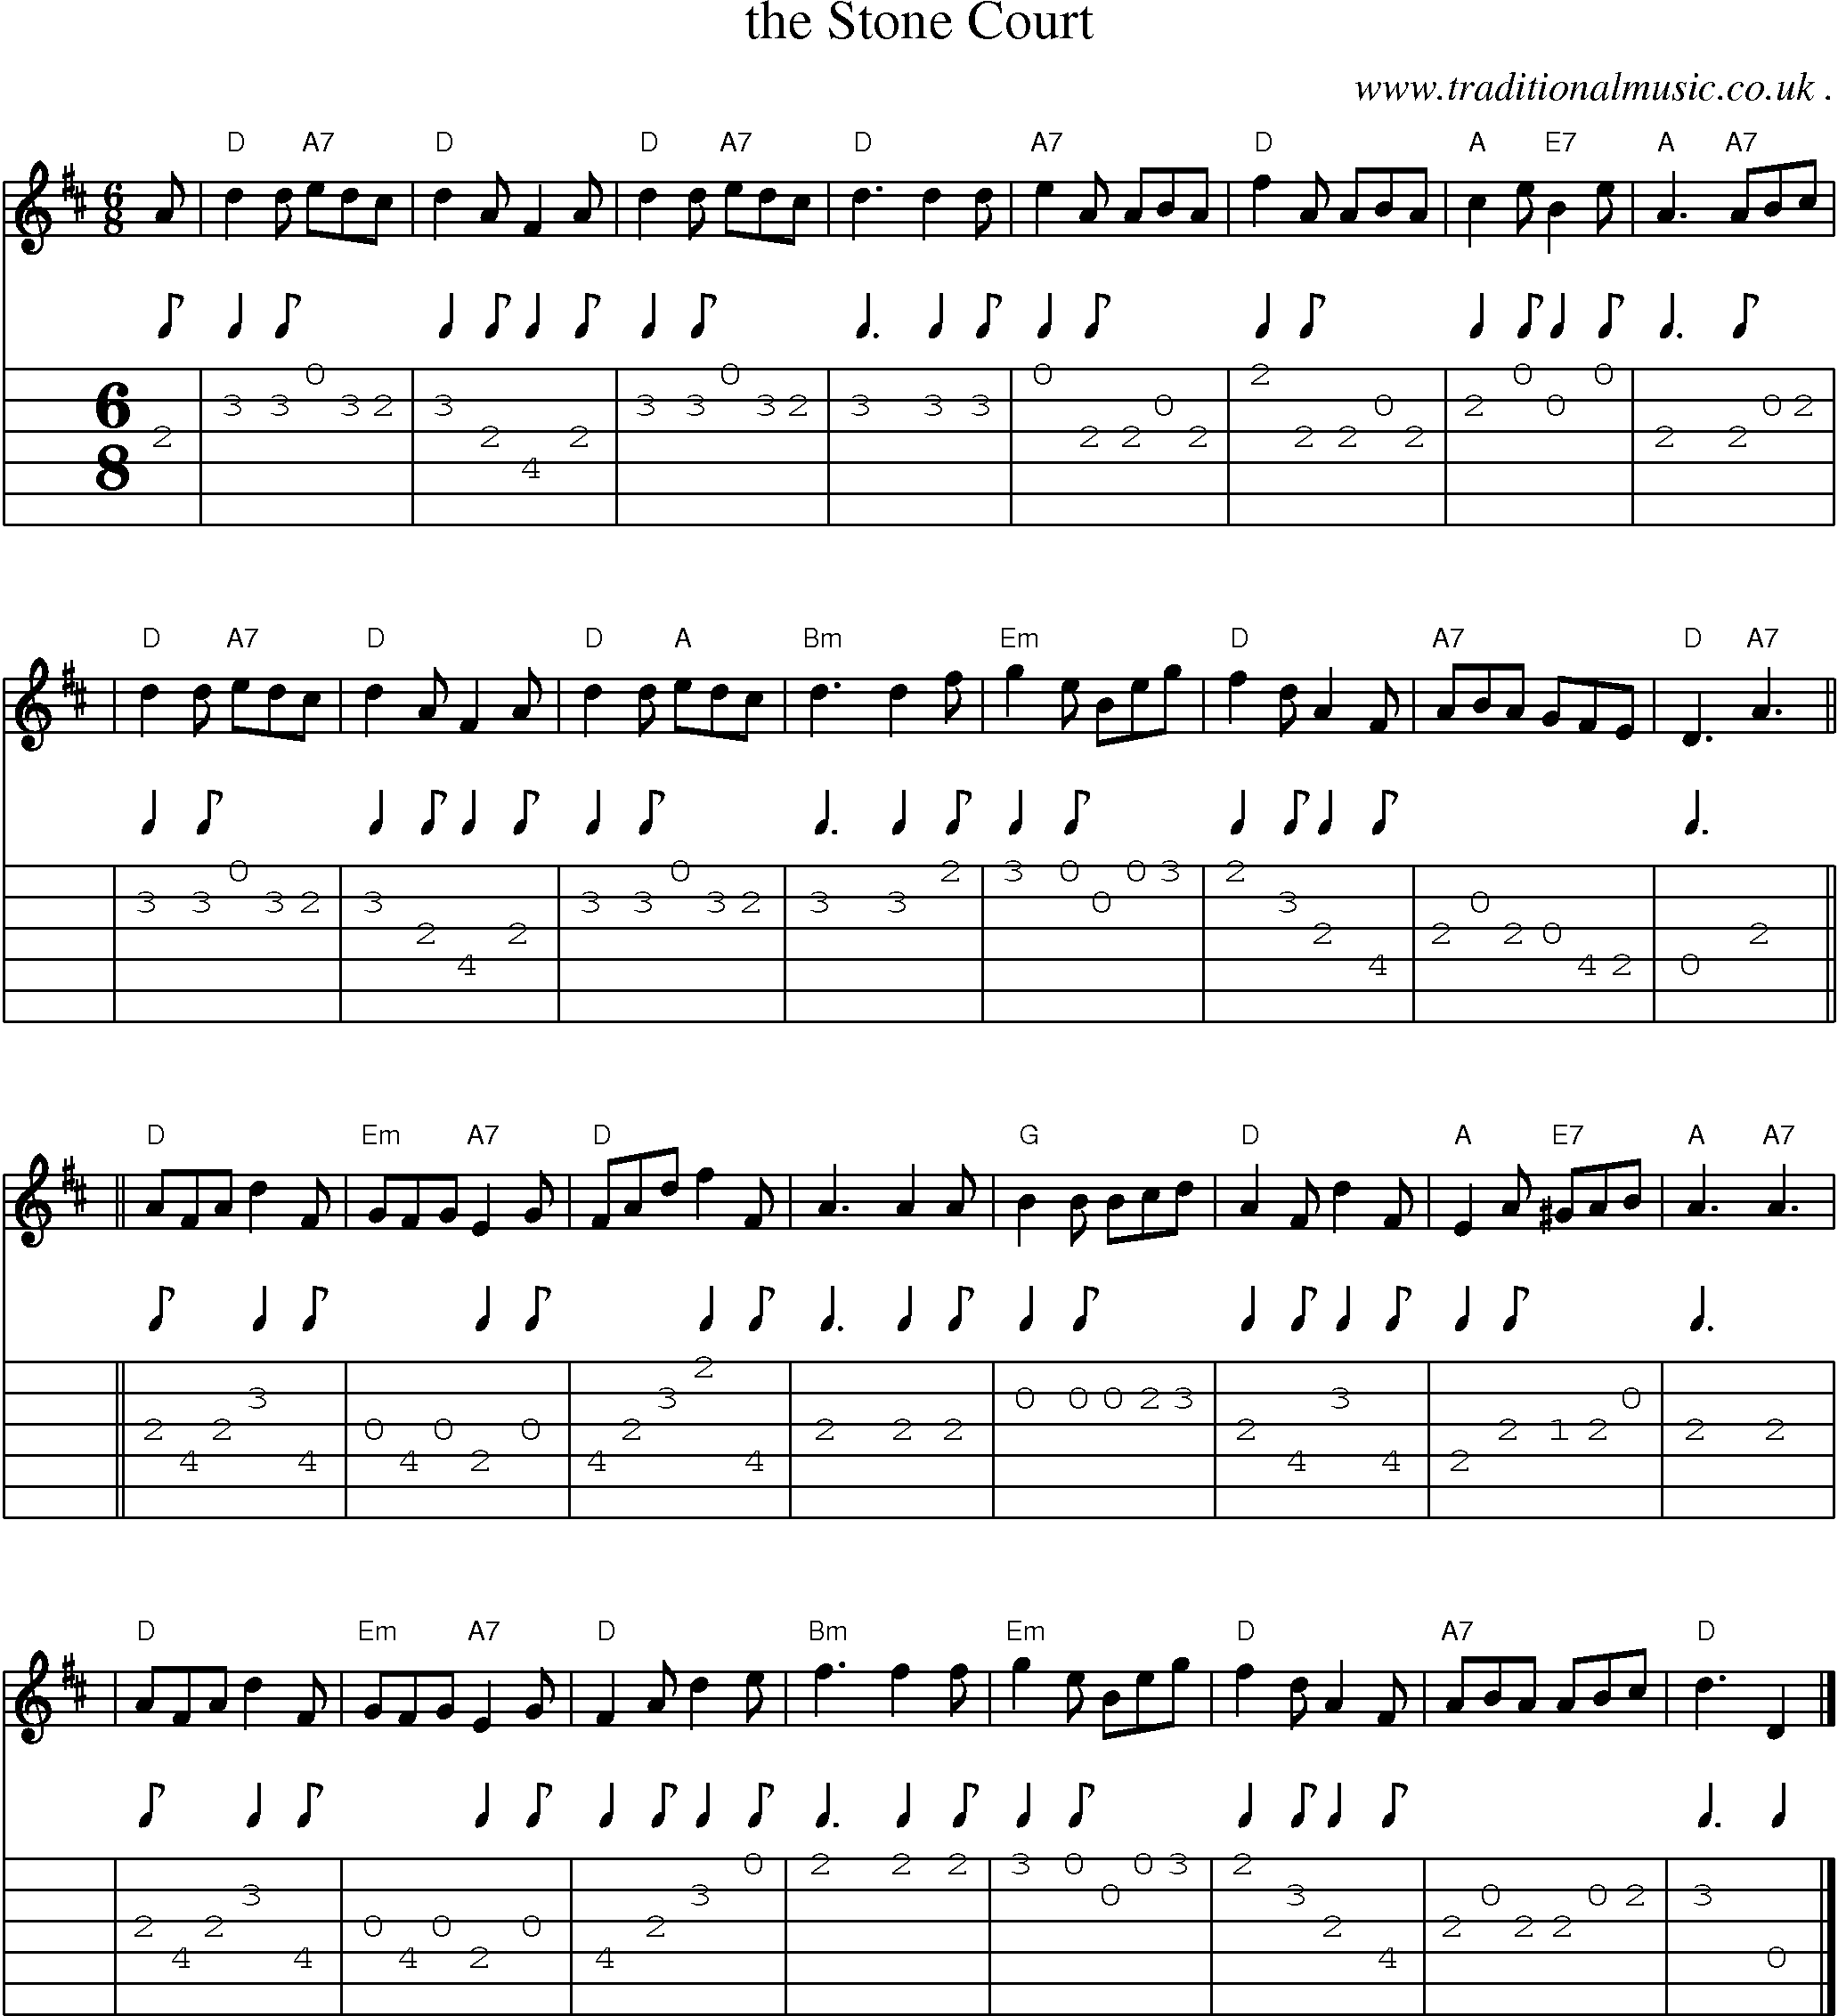 Sheet-music  score, Chords and Guitar Tabs for The Stone Court